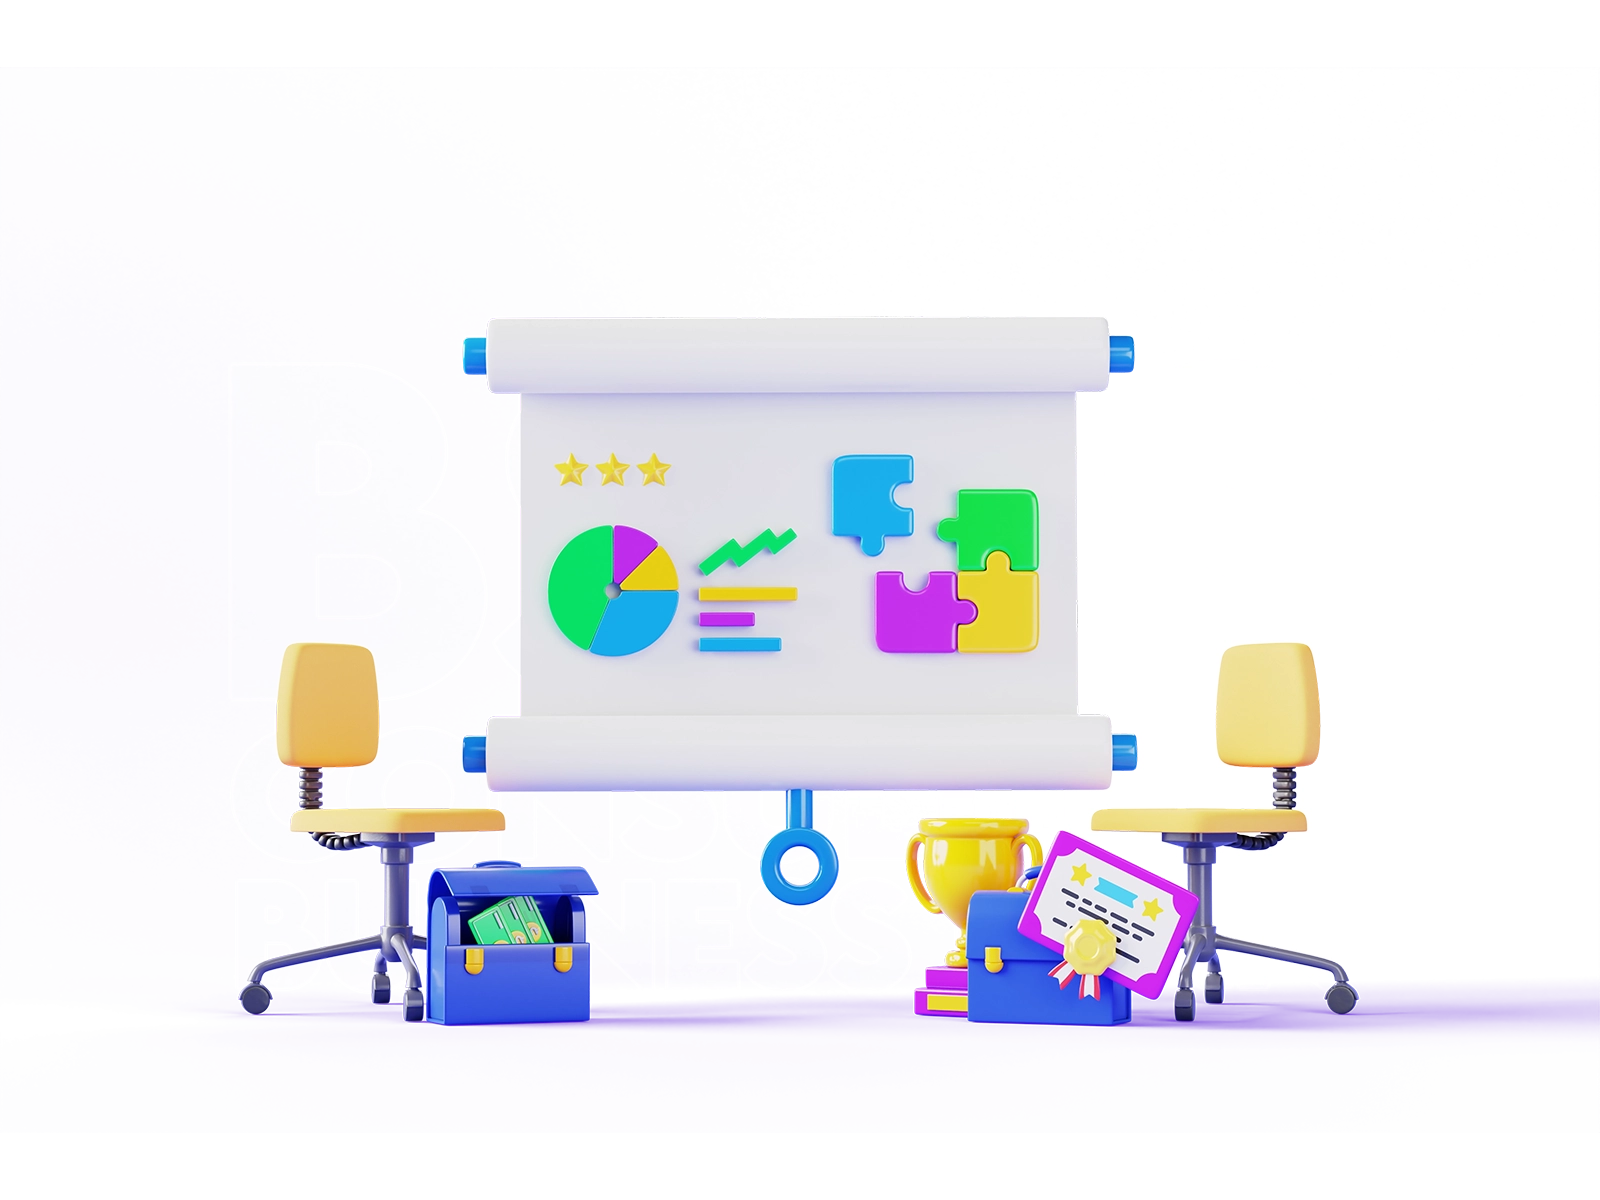 Business plan service - bsns consulting